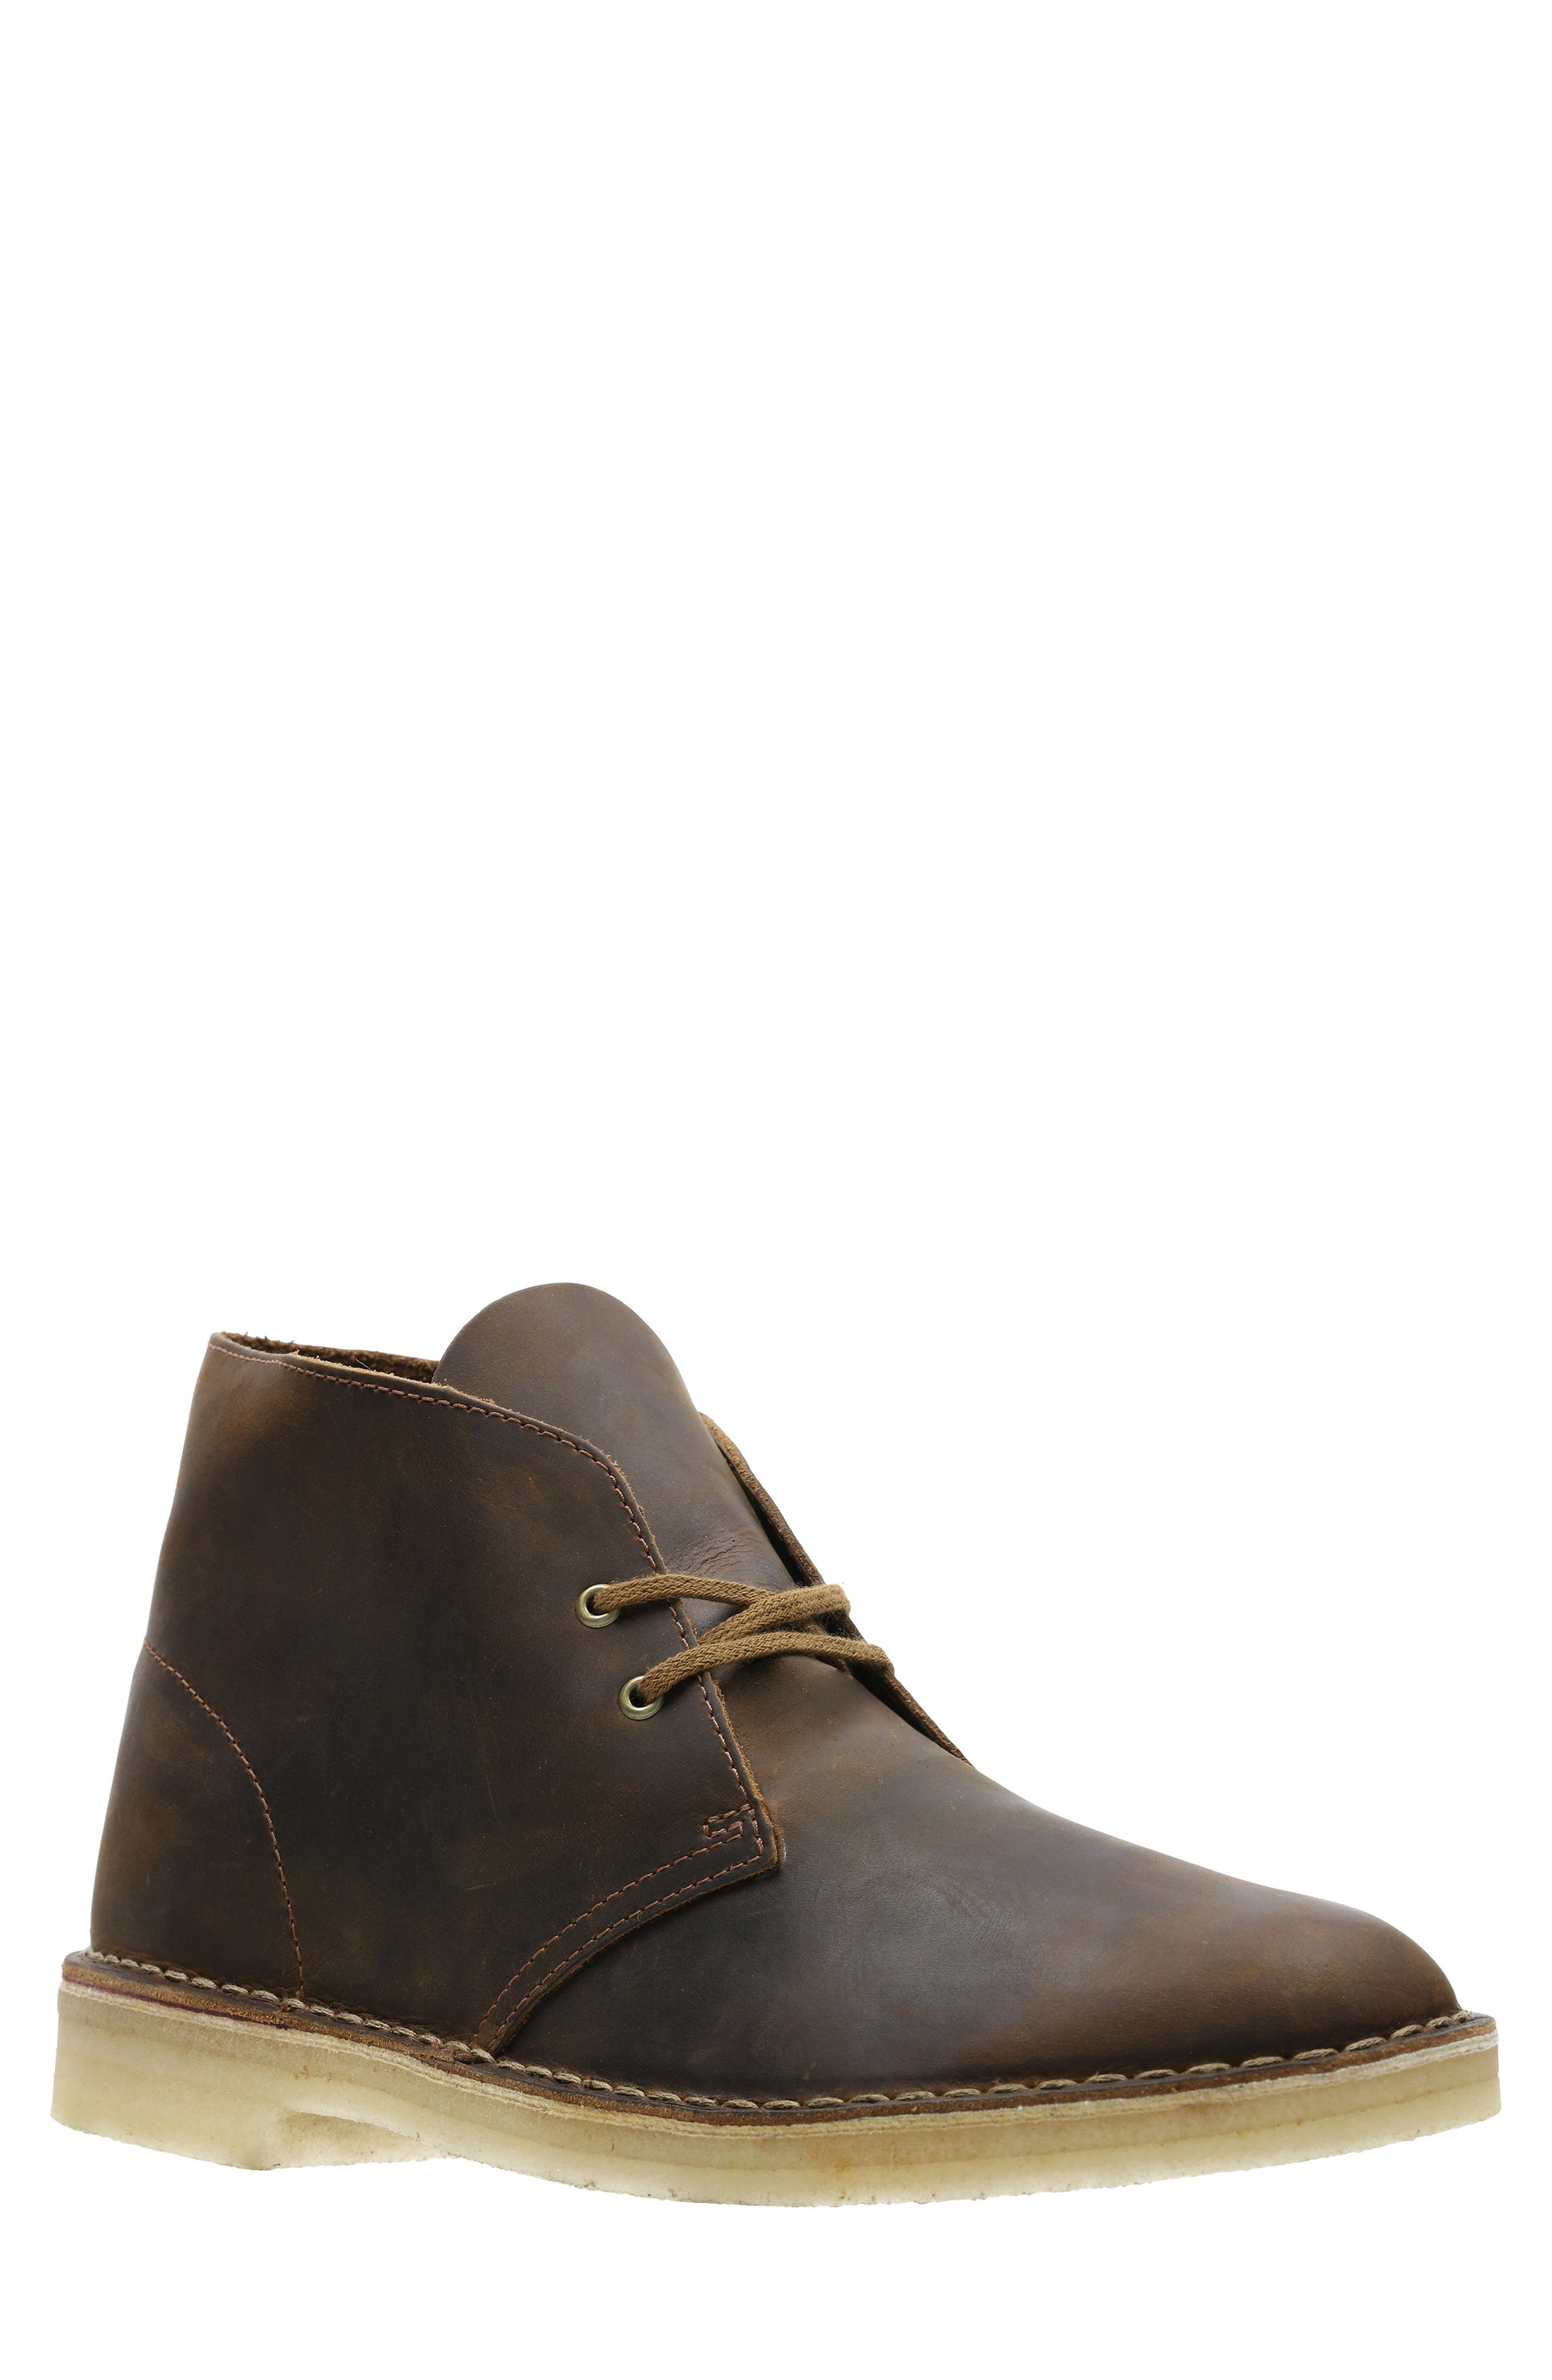 Buy > clarks long brown boots > in stock